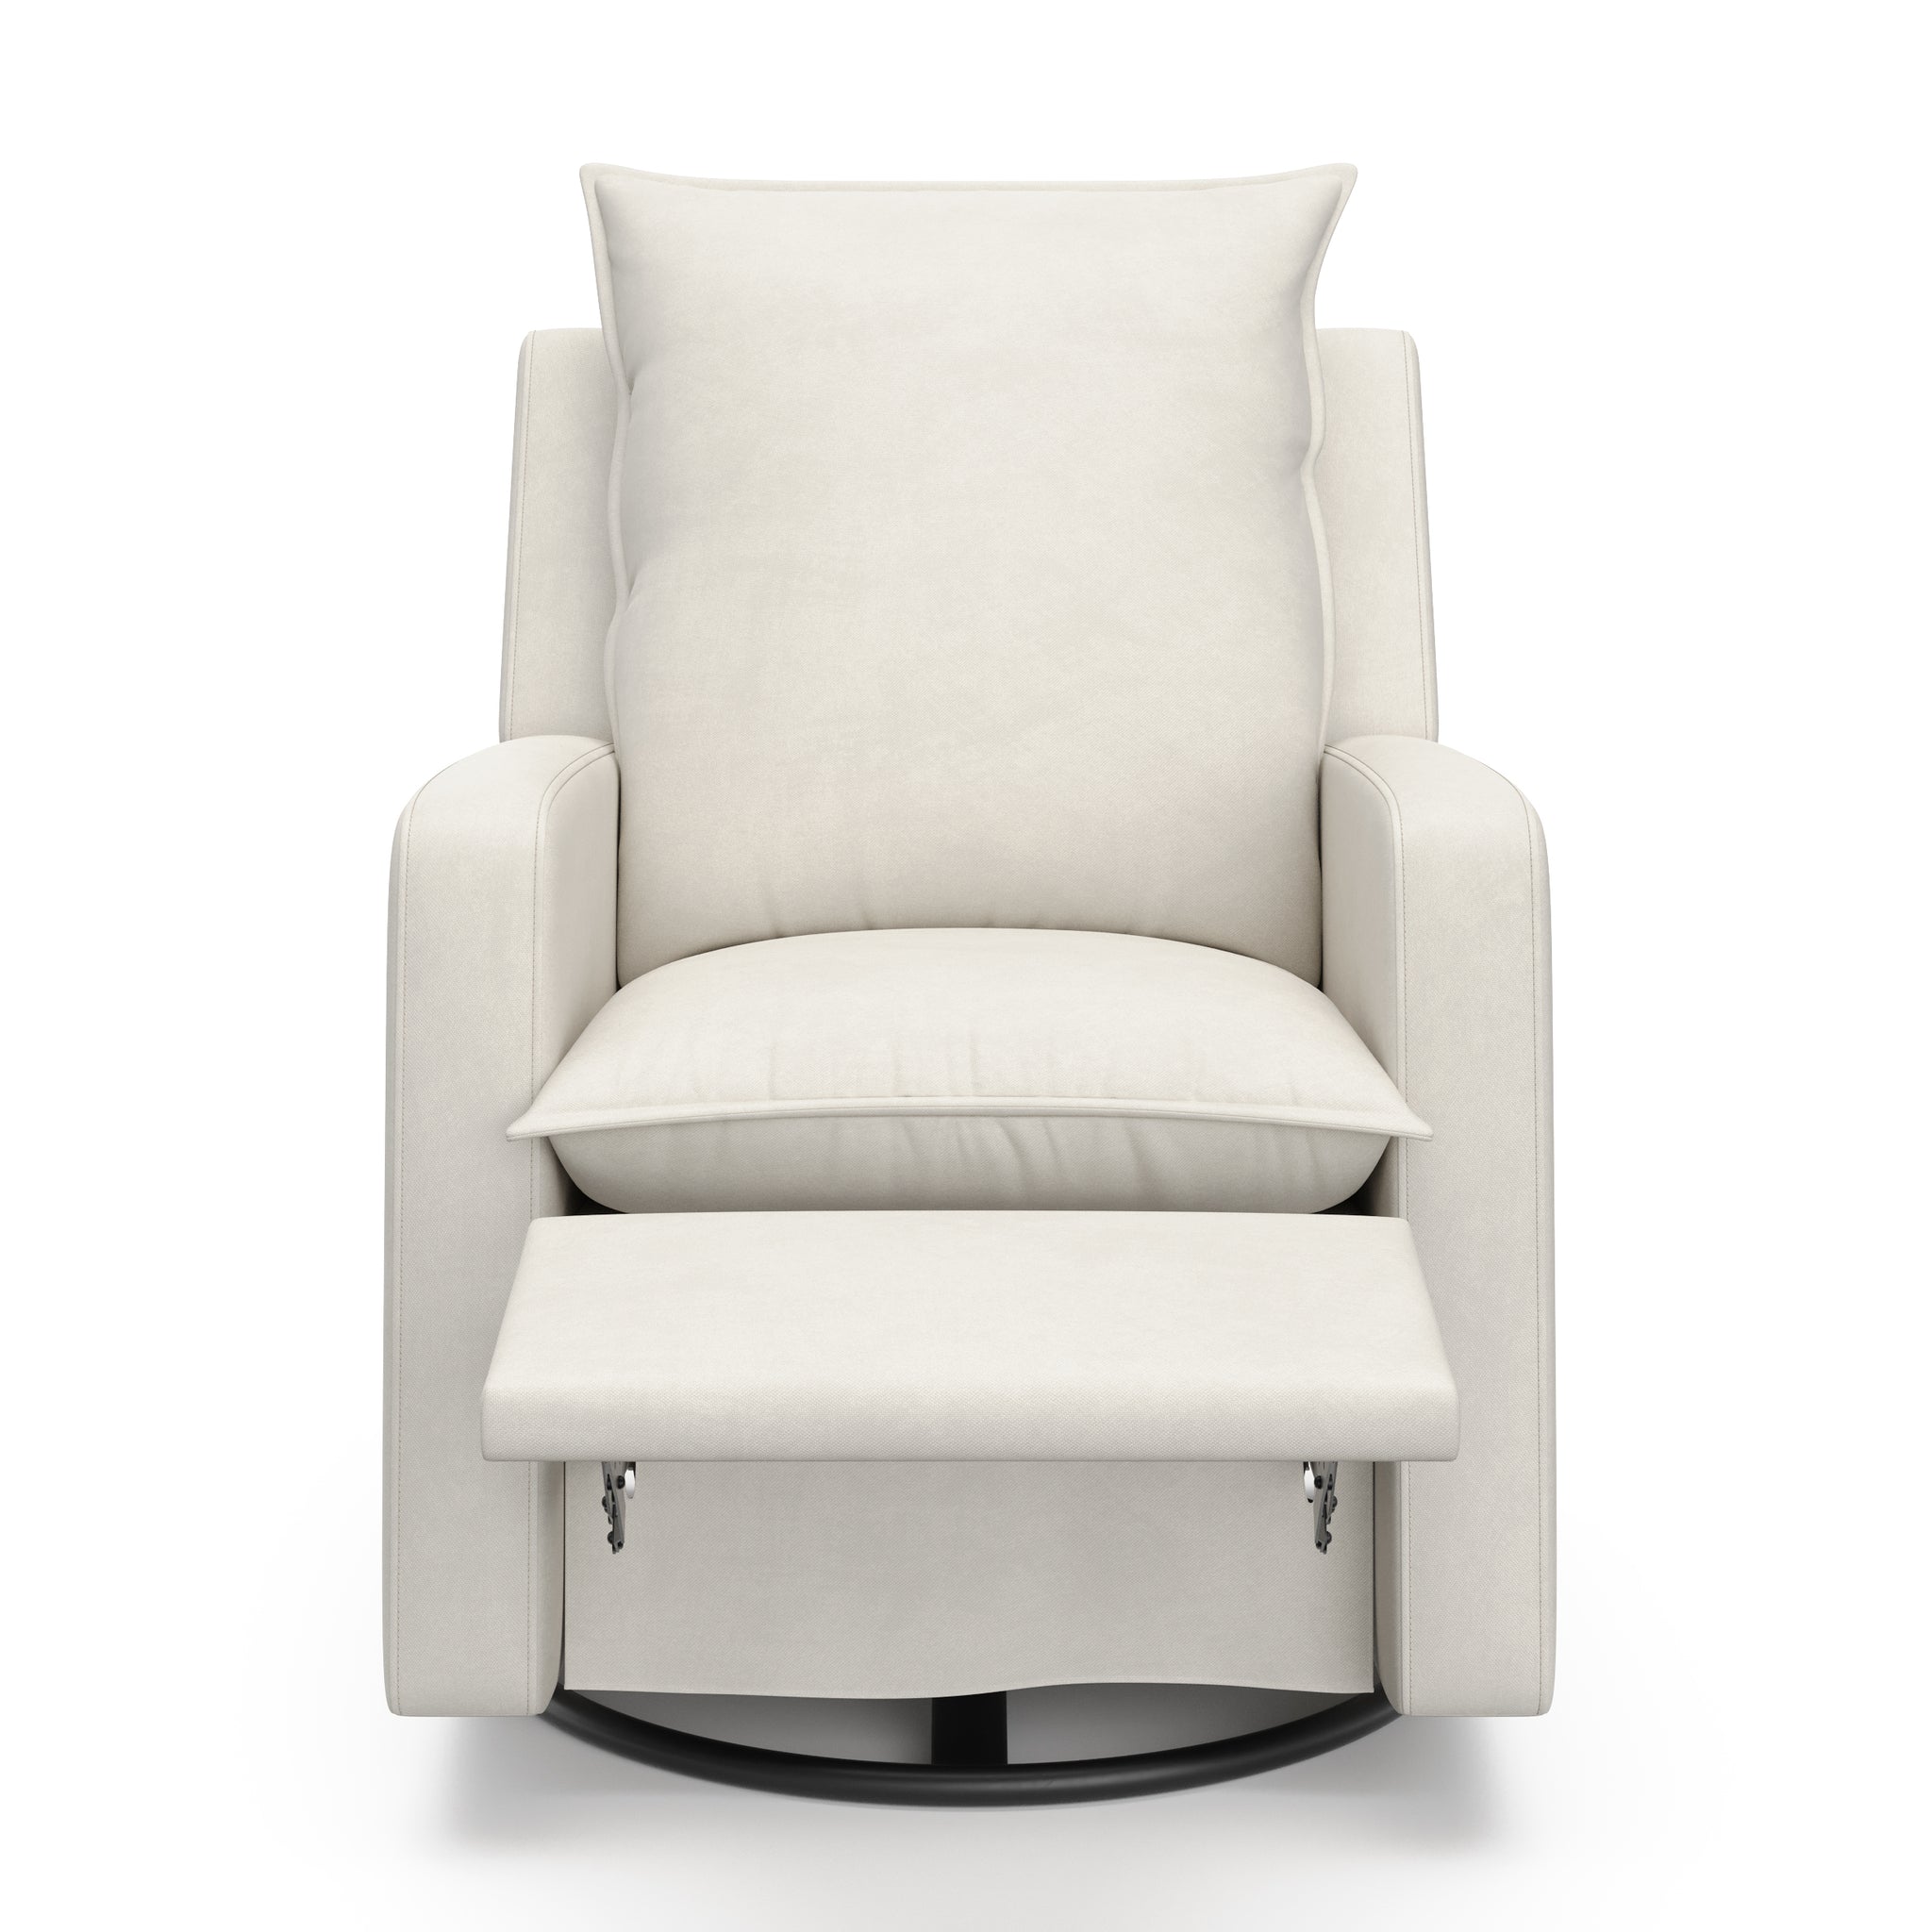 Front view of an ivory reclining glider with an extended footrest